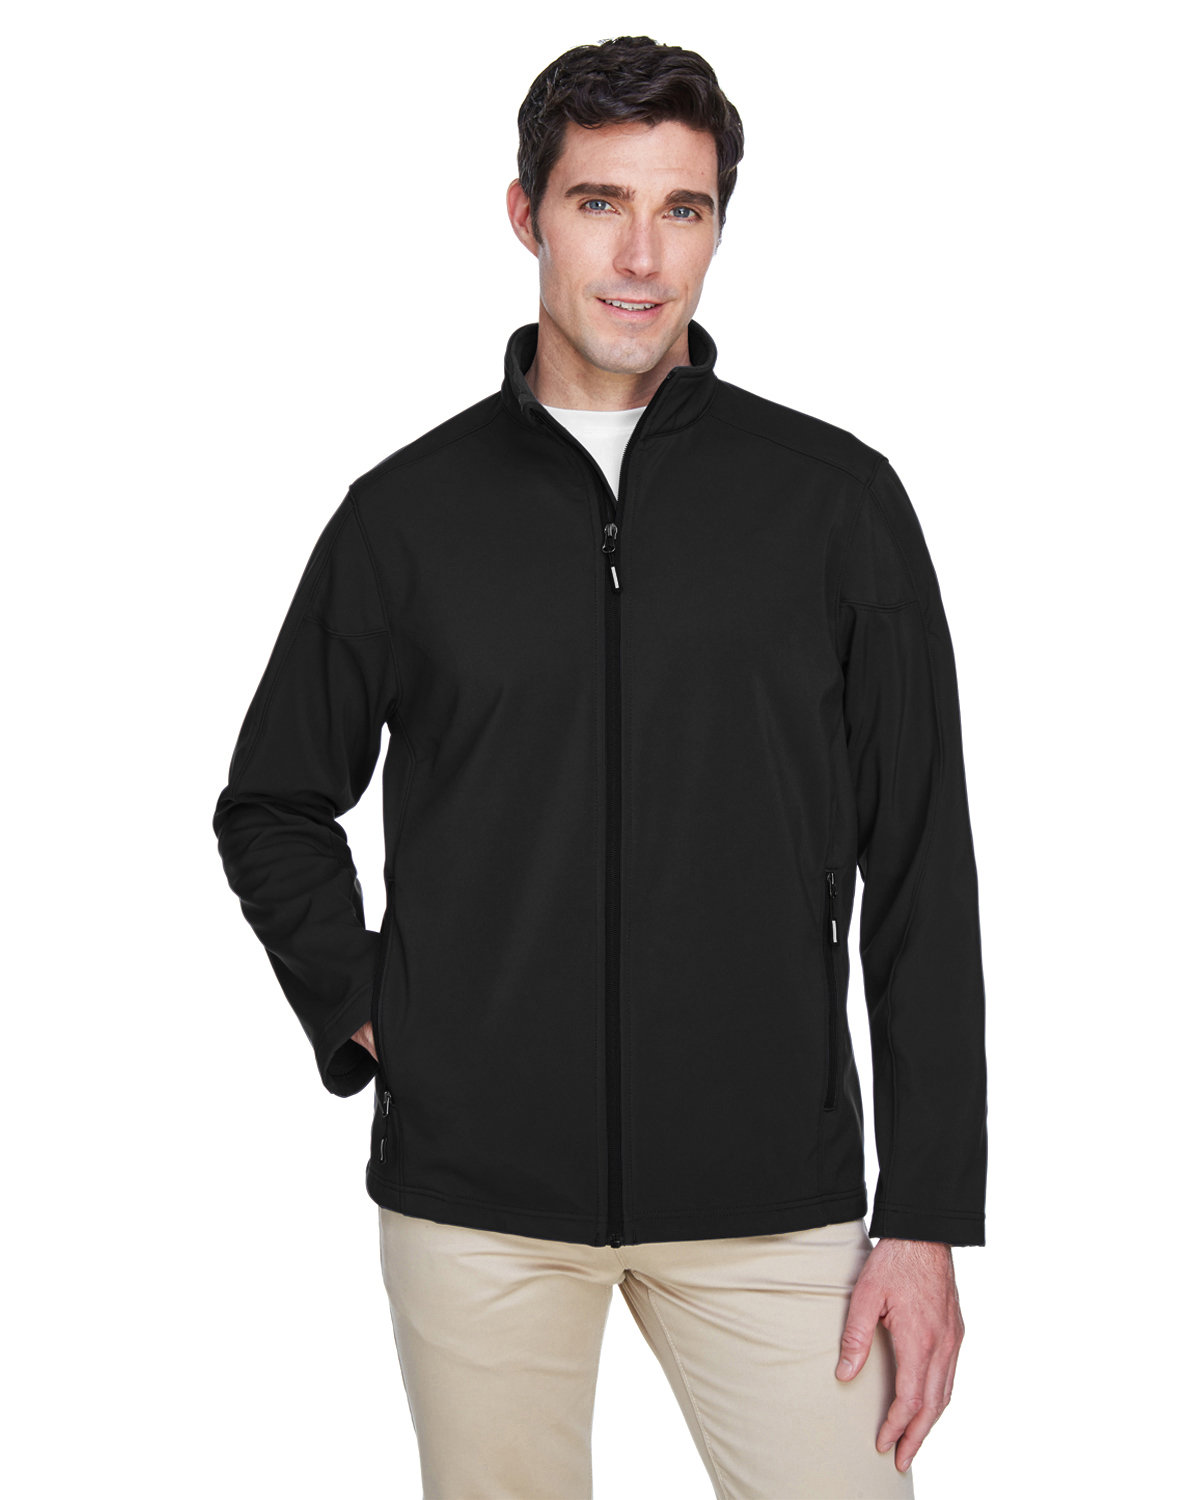 Core 365 88184T - Men's Tall Cruise Two-Layer Fleece Bonded Soft Shell Jacket